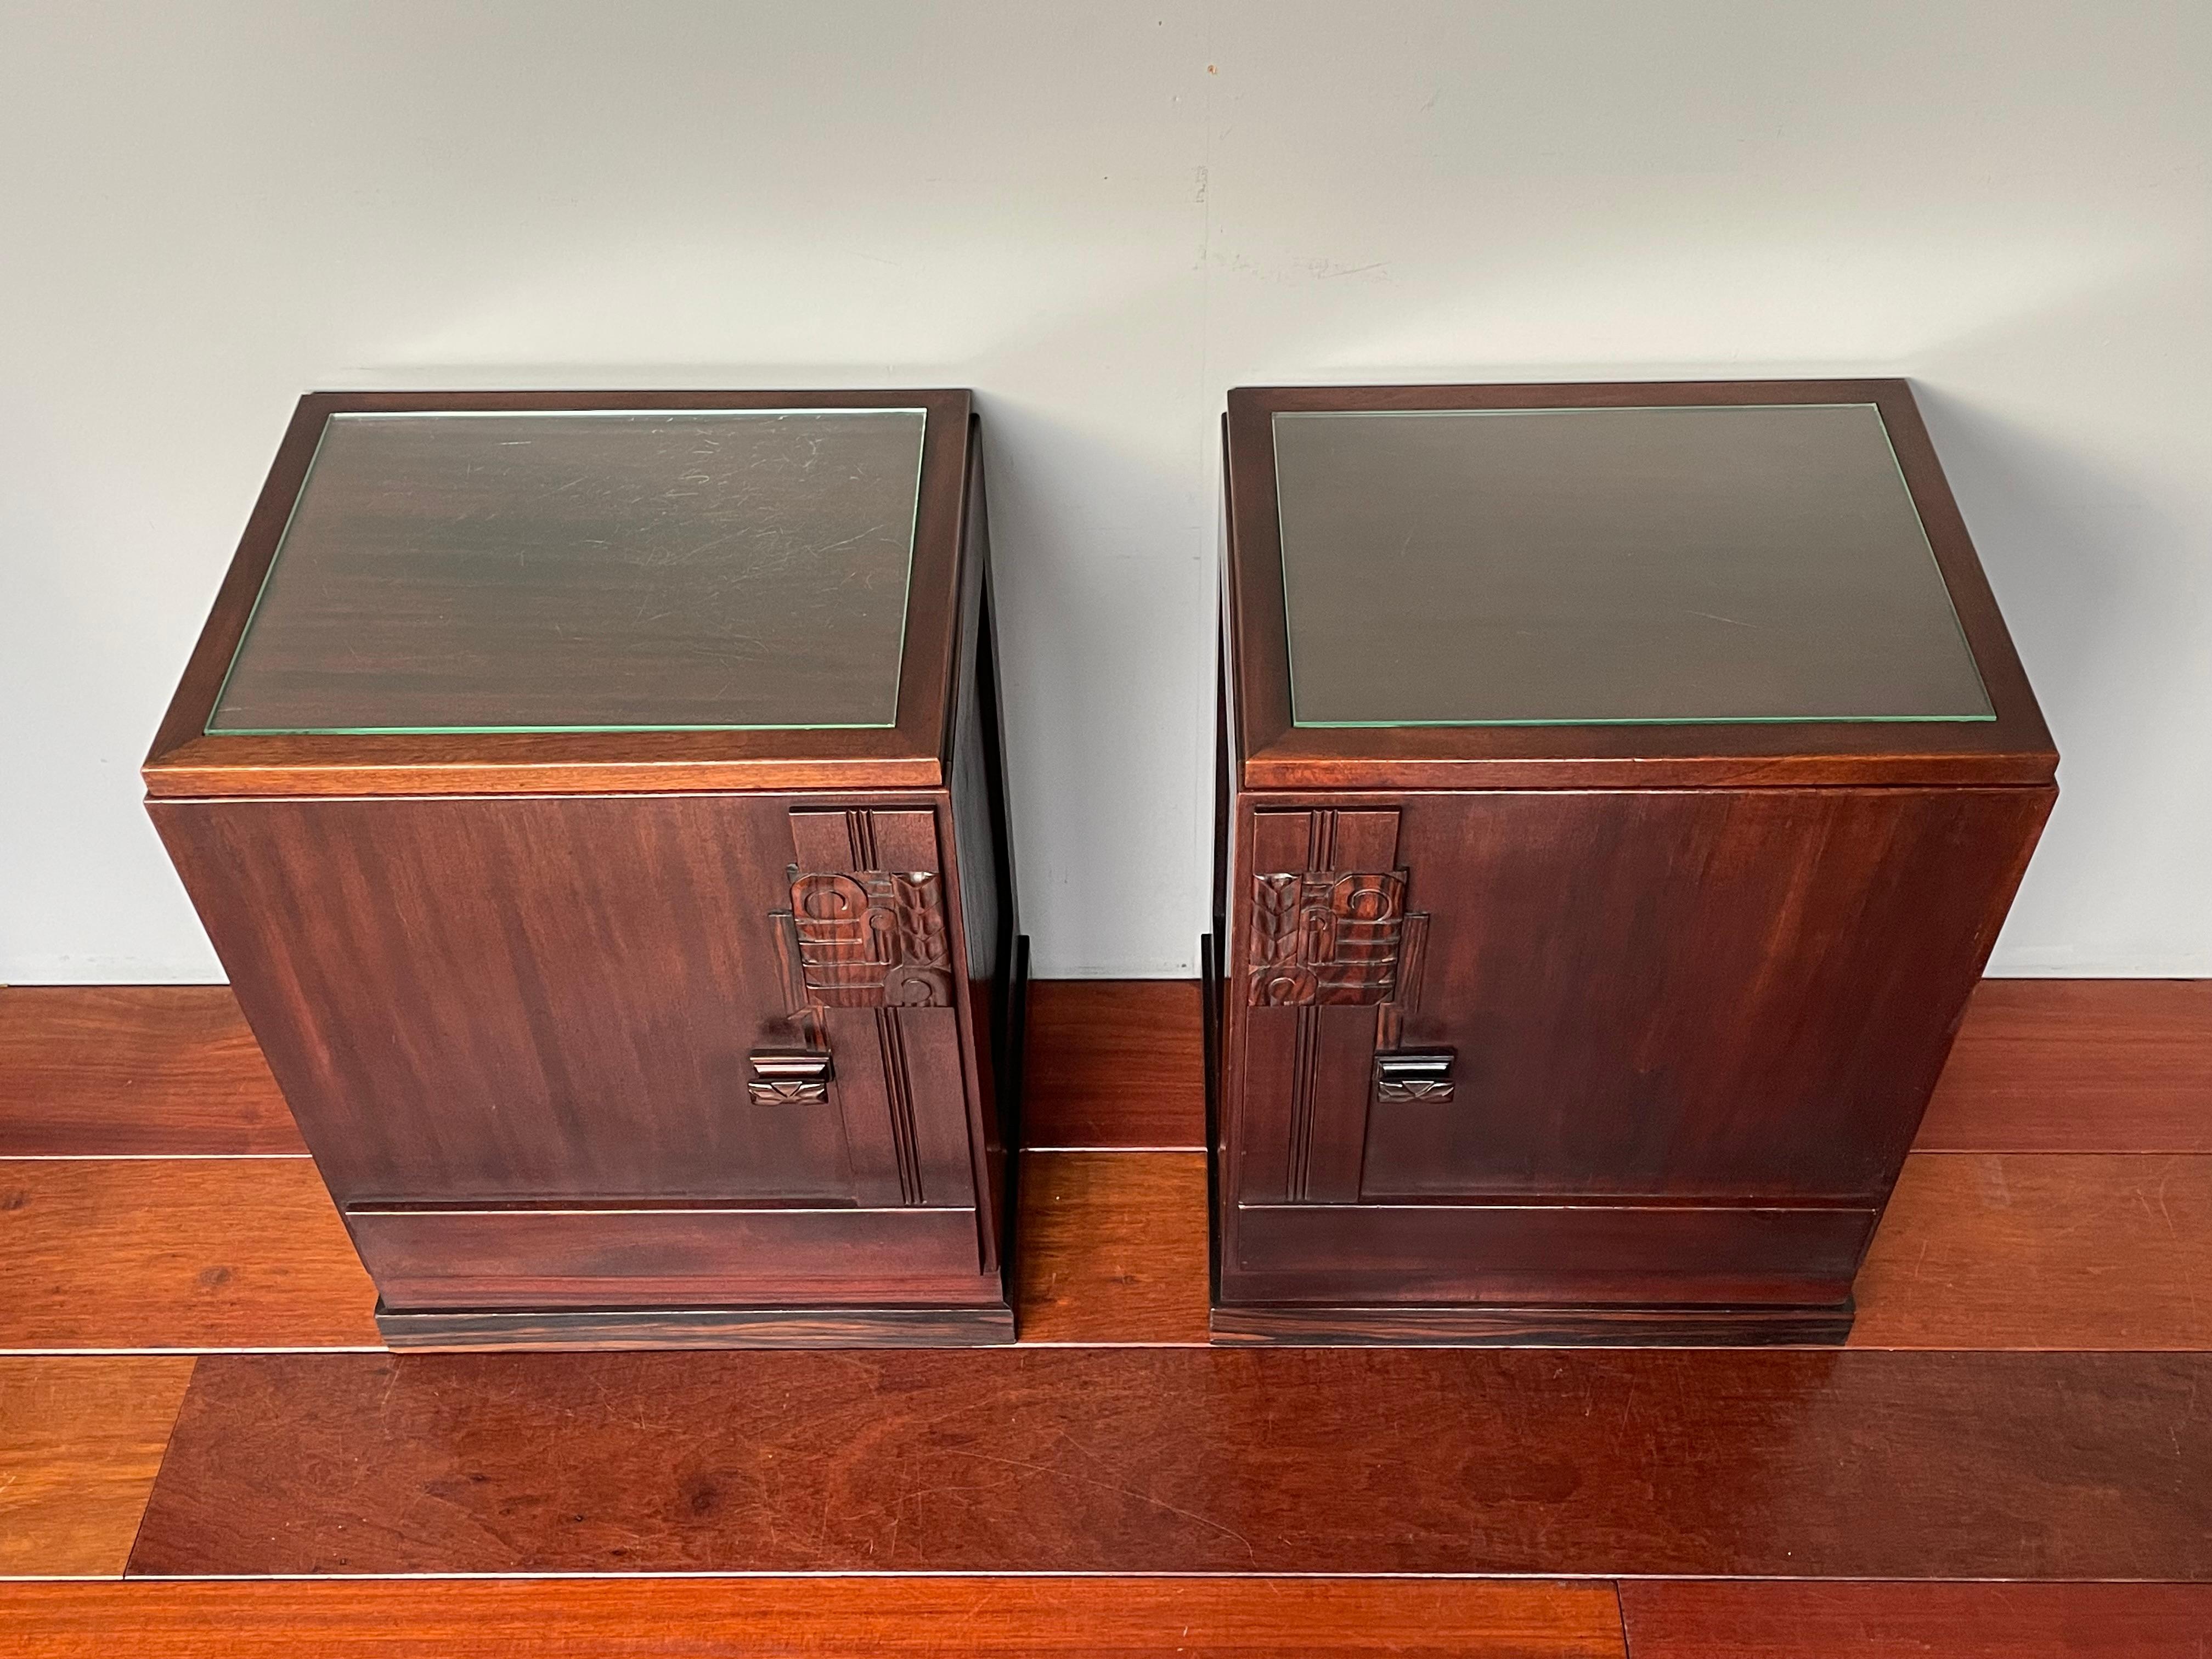 Top quality and great condition, patinated nutwood, coromandel & oak cabinets by one of Holland's finest.

These beautifully designed and skillfully handcrafted nightstands date from the earliest years of the 1900s. They were undoubtedly made by